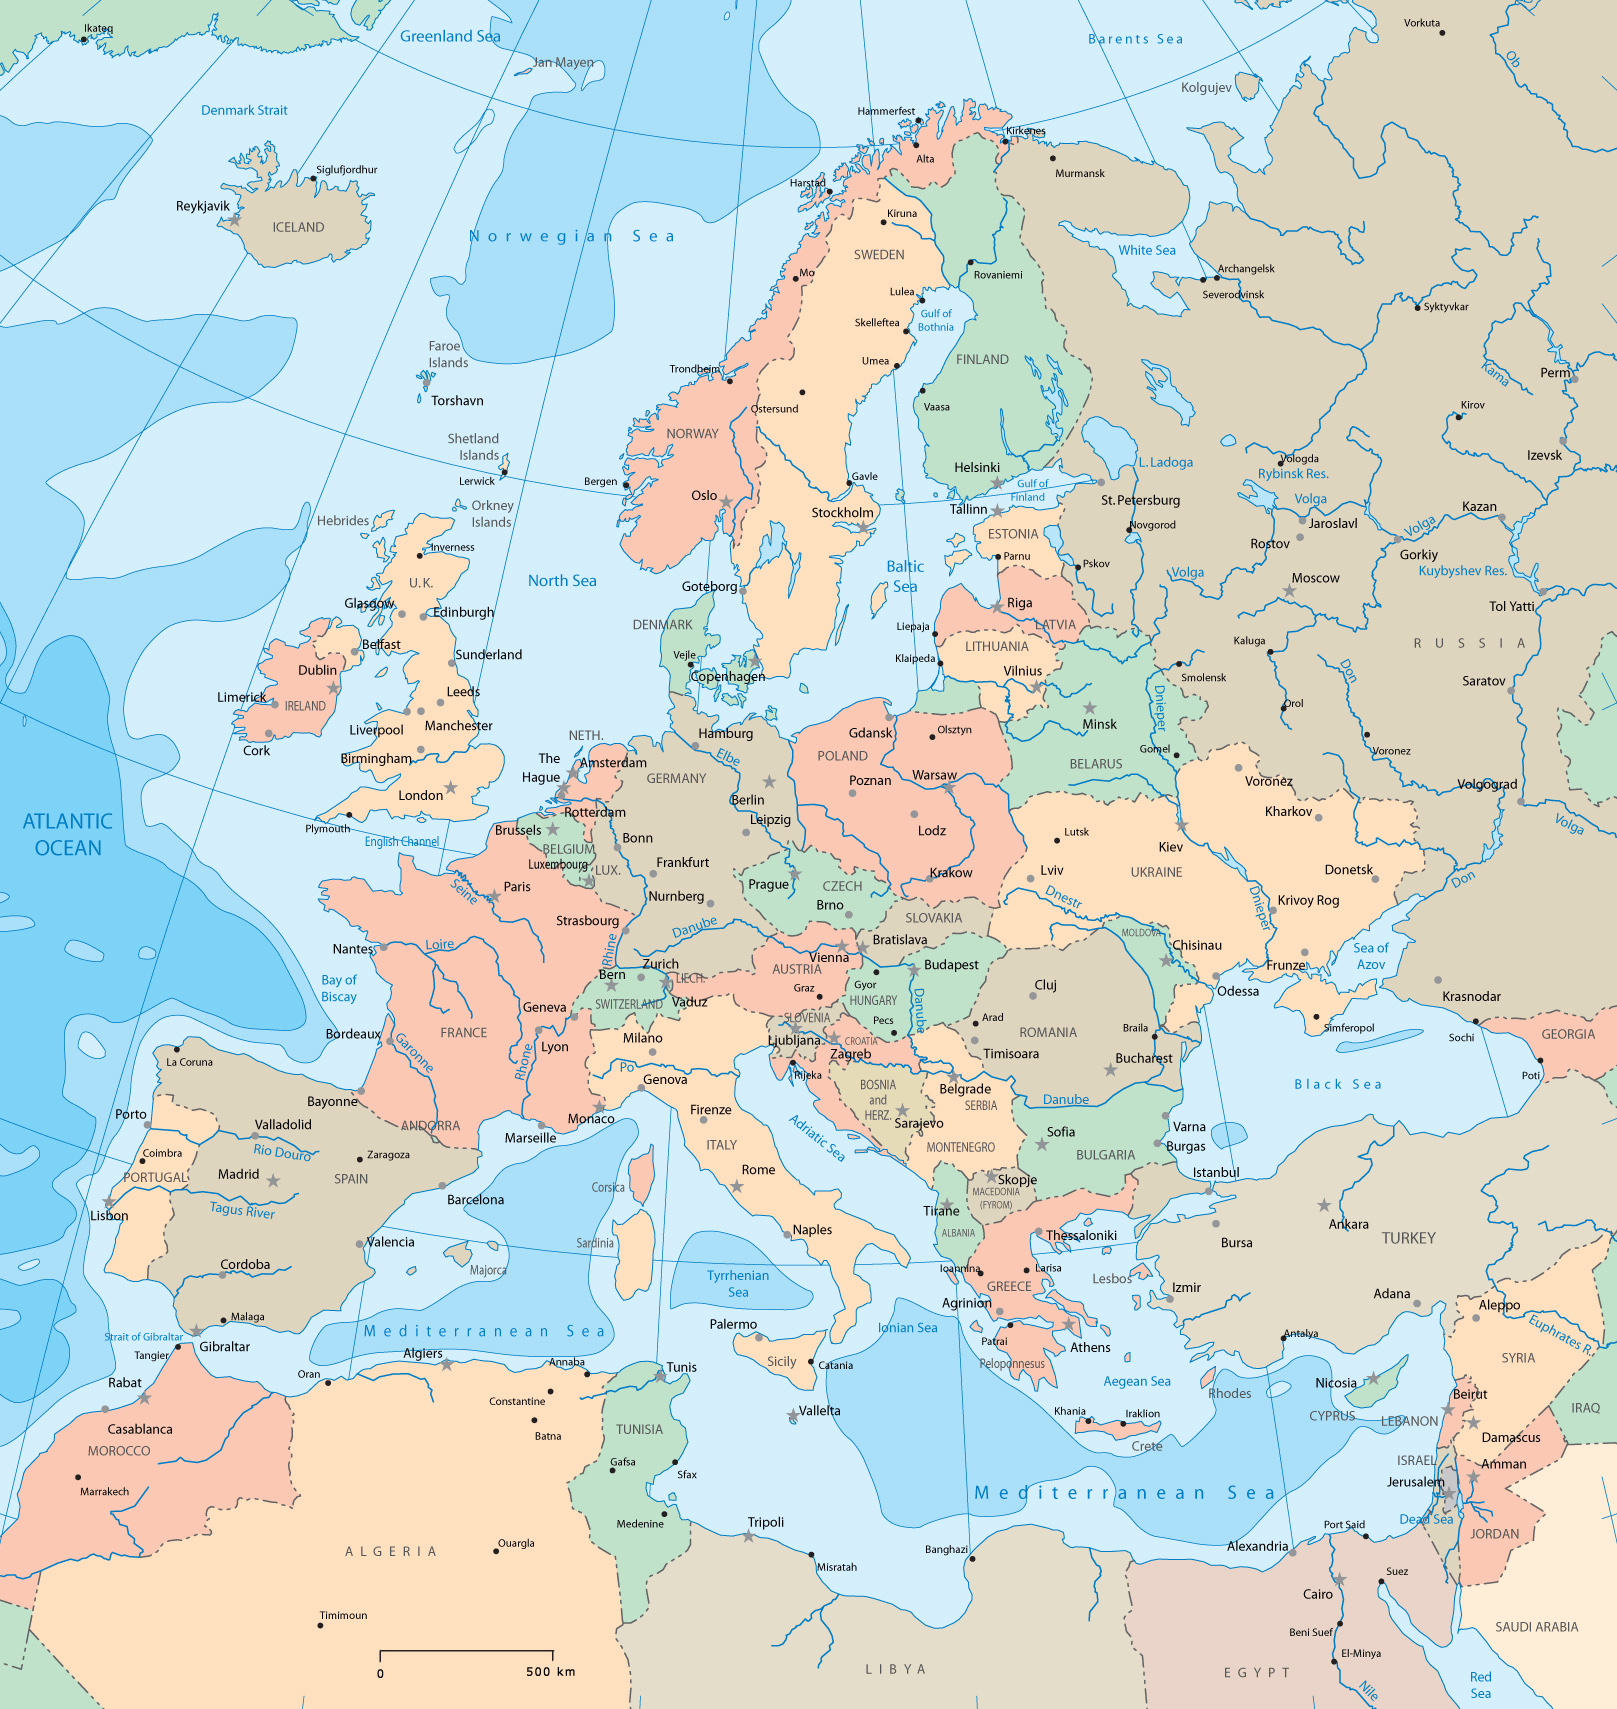 Large Map Of Europe With Cities